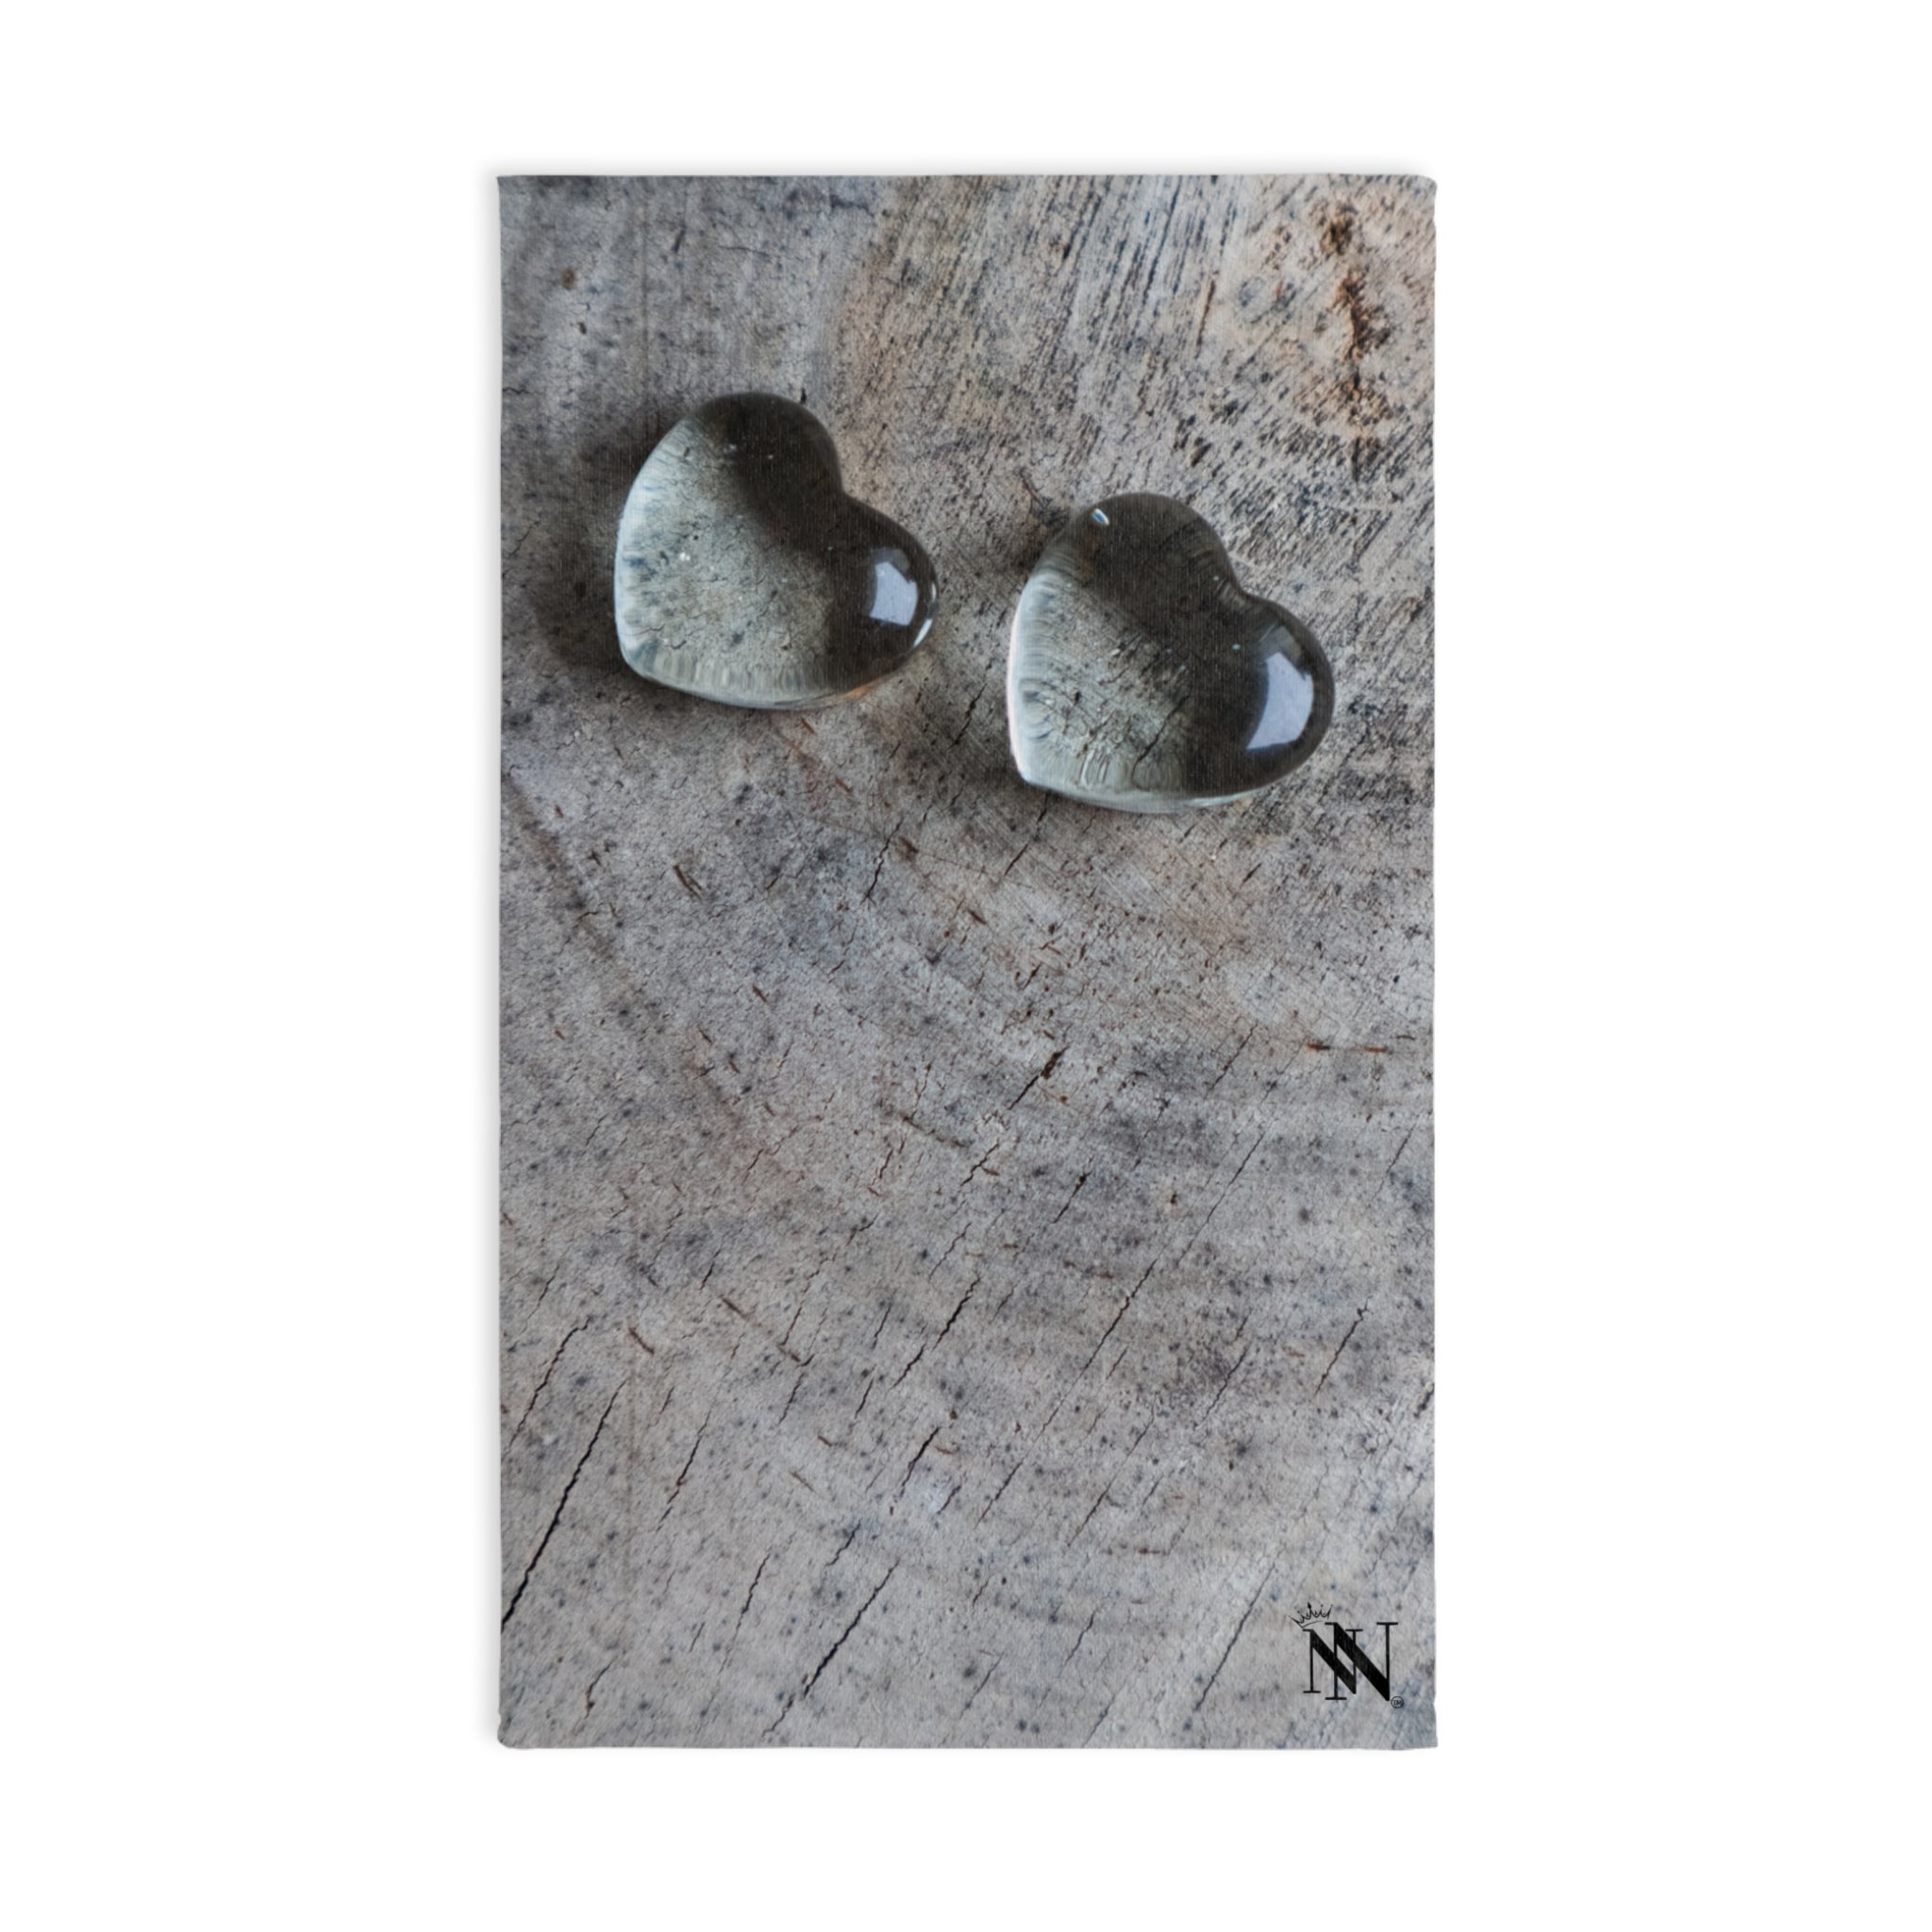 Glass Hearts Wood White | Funny Gifts for Men - Gifts for Him - Birthday Gifts for Men, Him, Her, Husband, Boyfriend, Girlfriend, New Couple Gifts, Fathers & Valentines Day Gifts, Christmas Gifts NECTAR NAPKINS